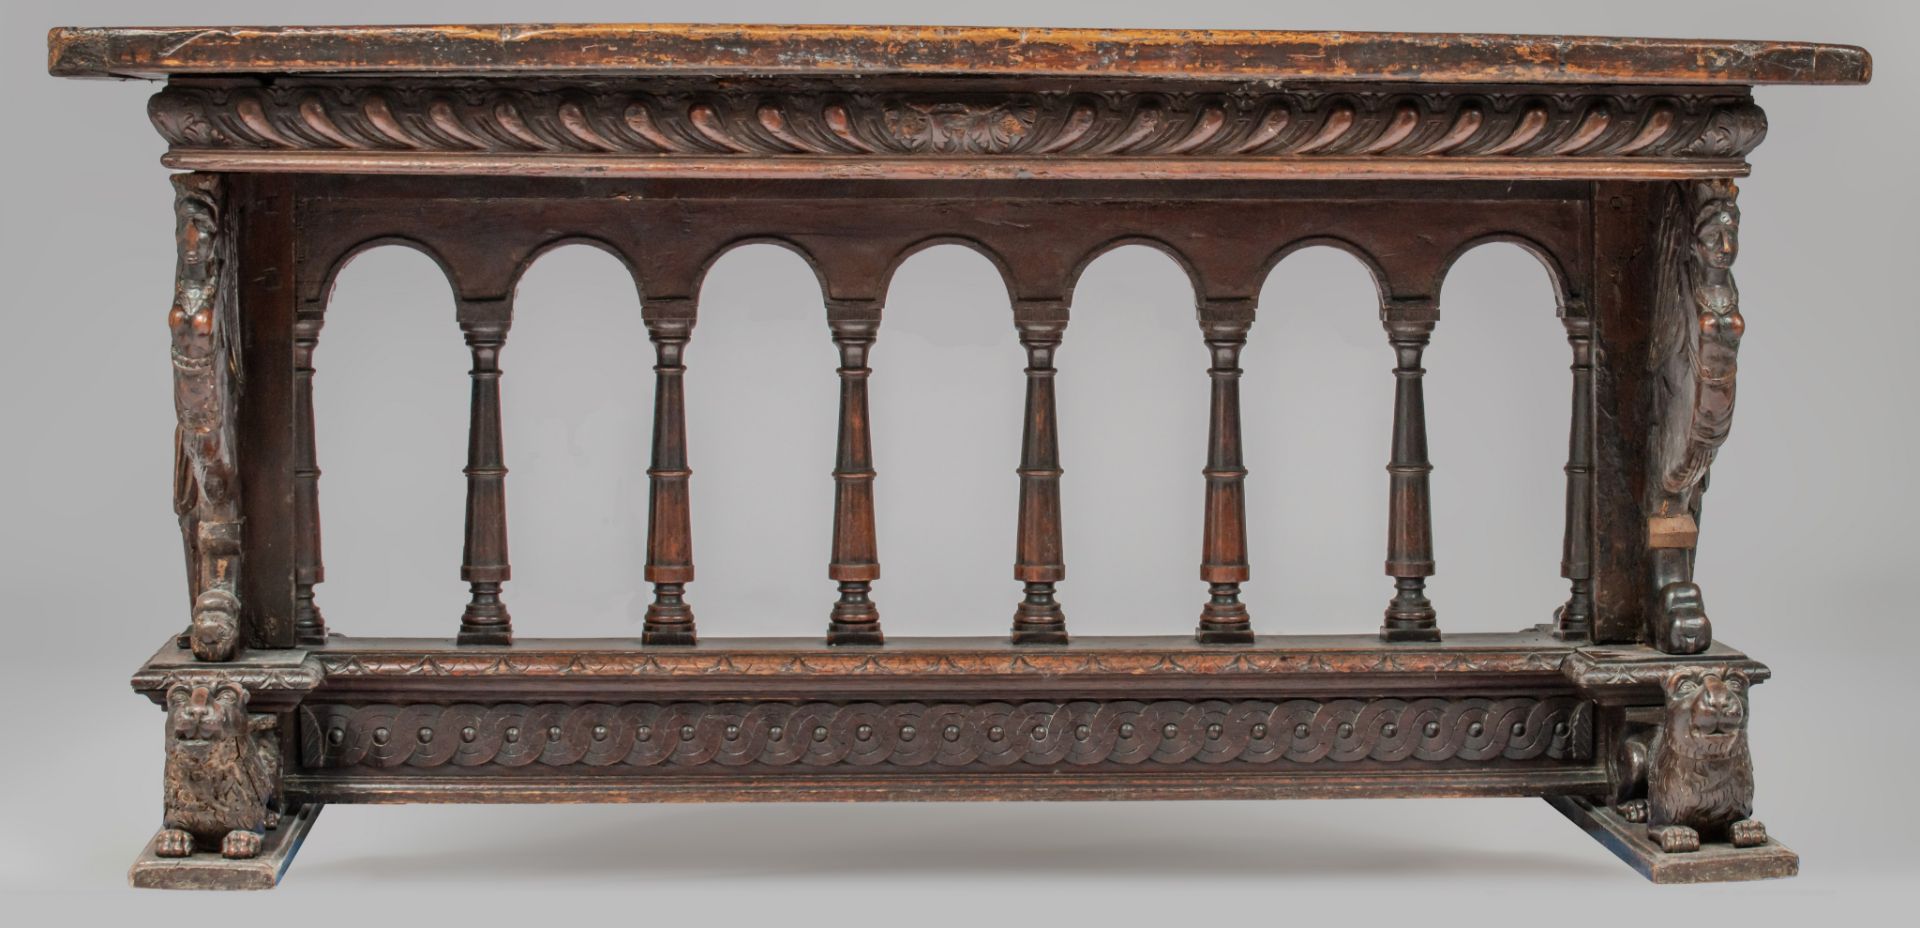 An exceptional Italian Renaissance carved walnut centre table, 16th/17thC, H 82 - W 165 - D 86,5 cm - Image 5 of 12